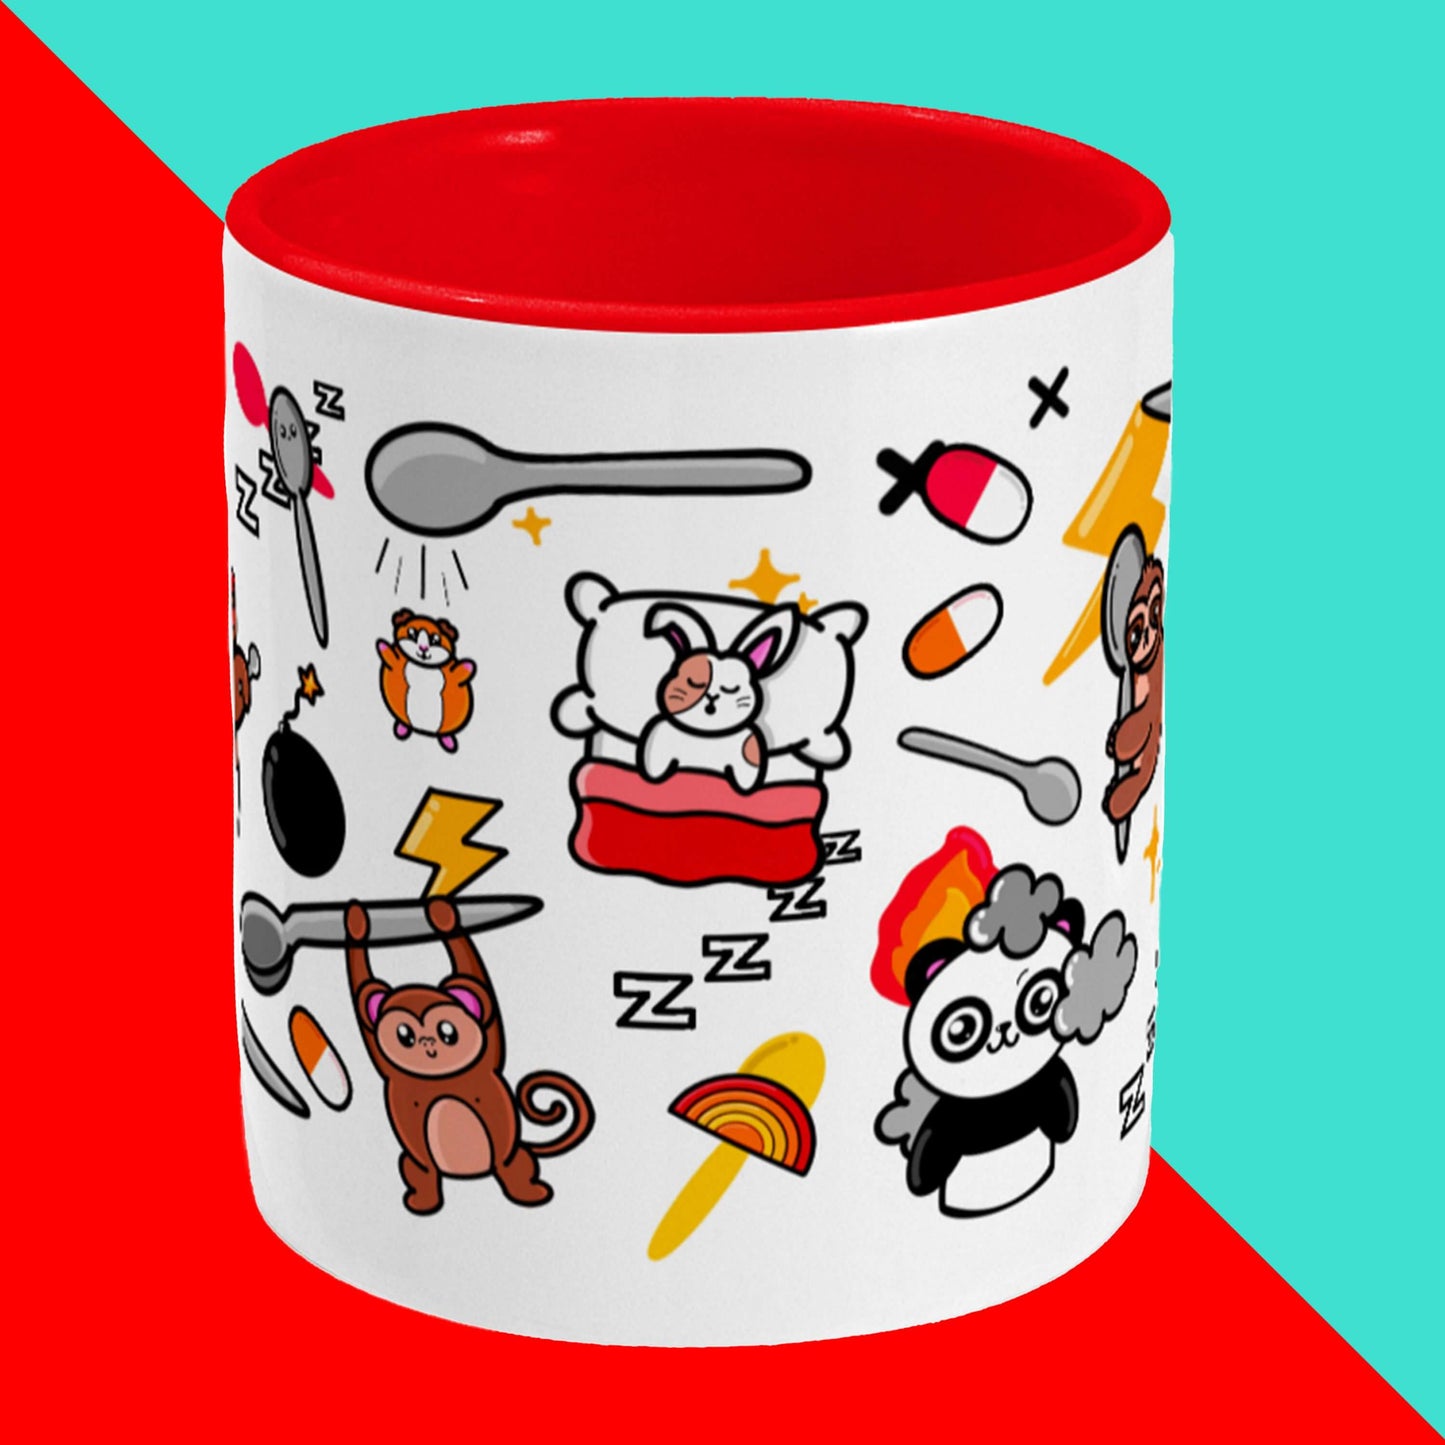 Spoonie Pattern Mug on a red and blue background. The white mug has a red handle and inside with various Innabox character illustrations on it. The hand drawn design is made to raise awareness for chronic and invisible illnesses 